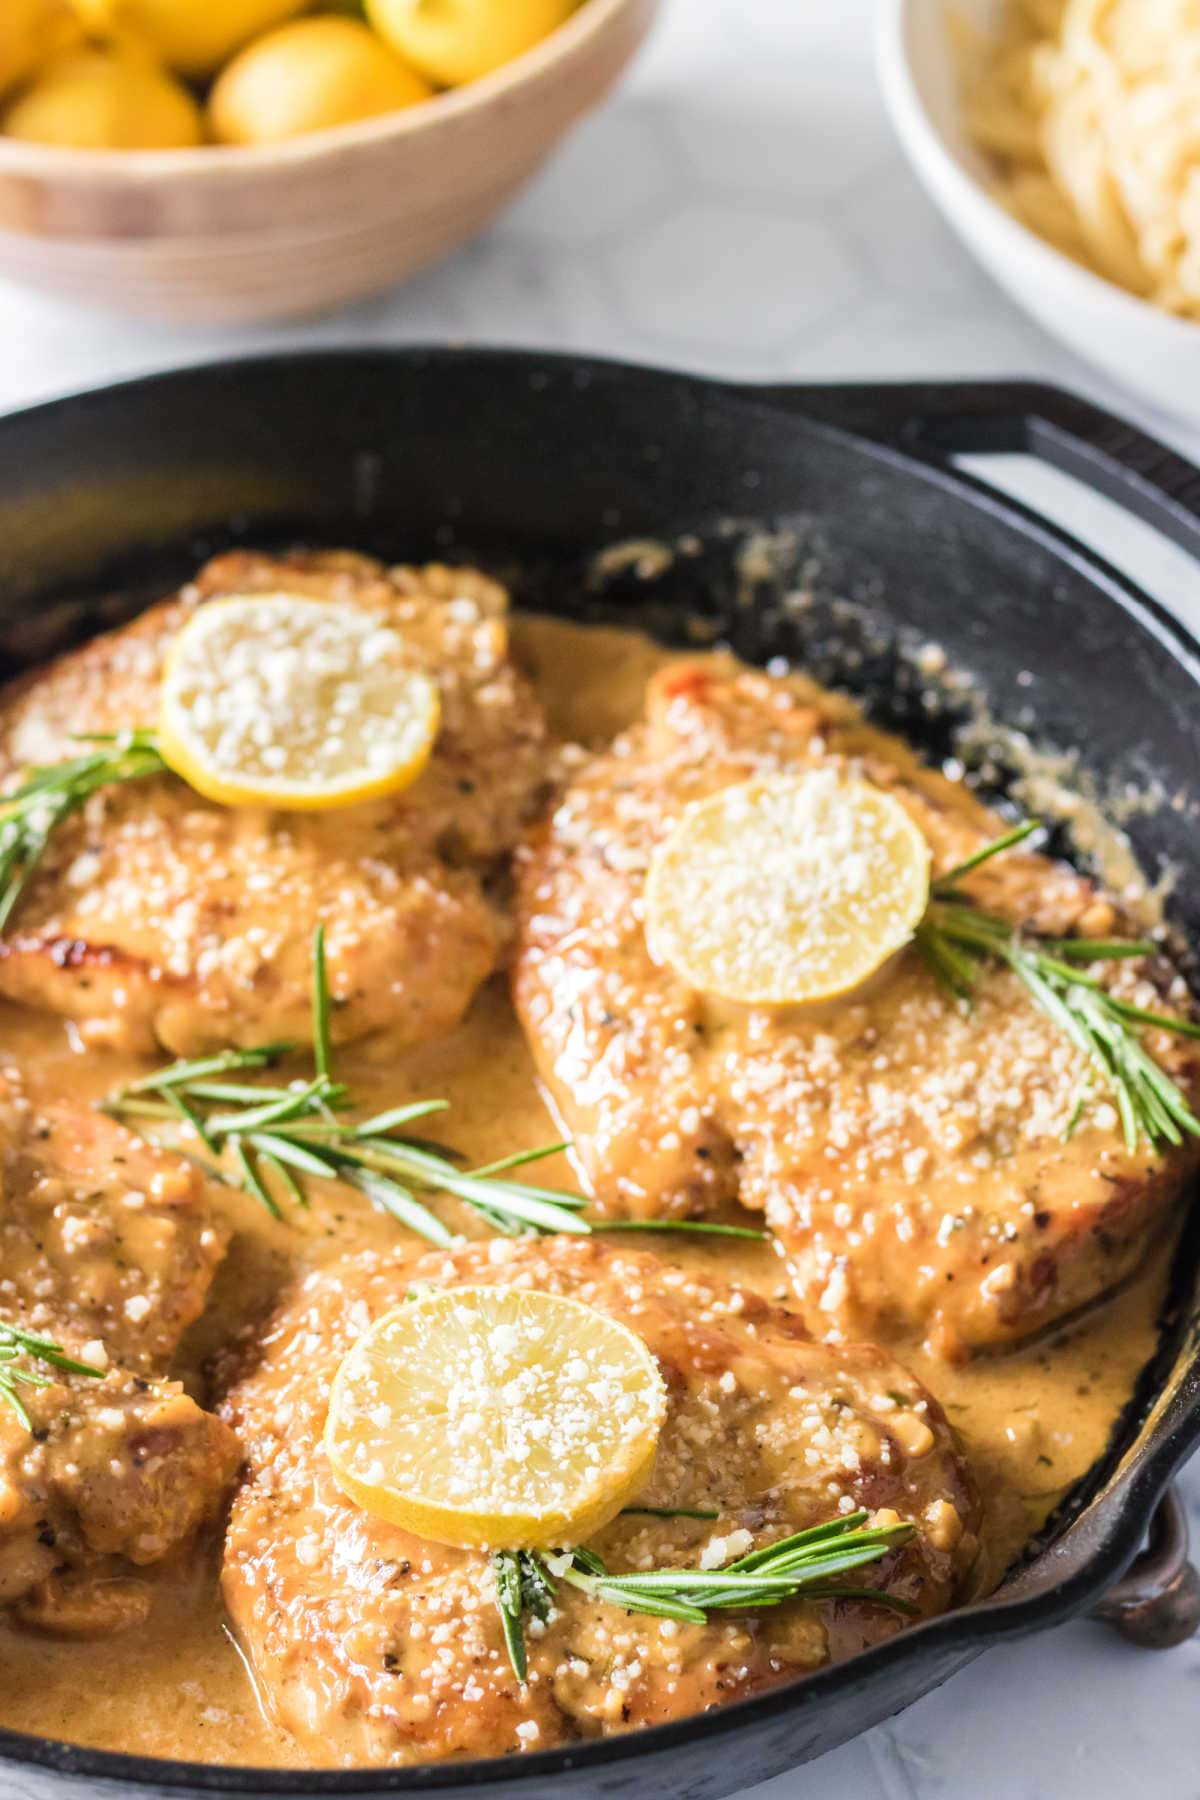 Closeup view of the lemon chicken in a skillet.